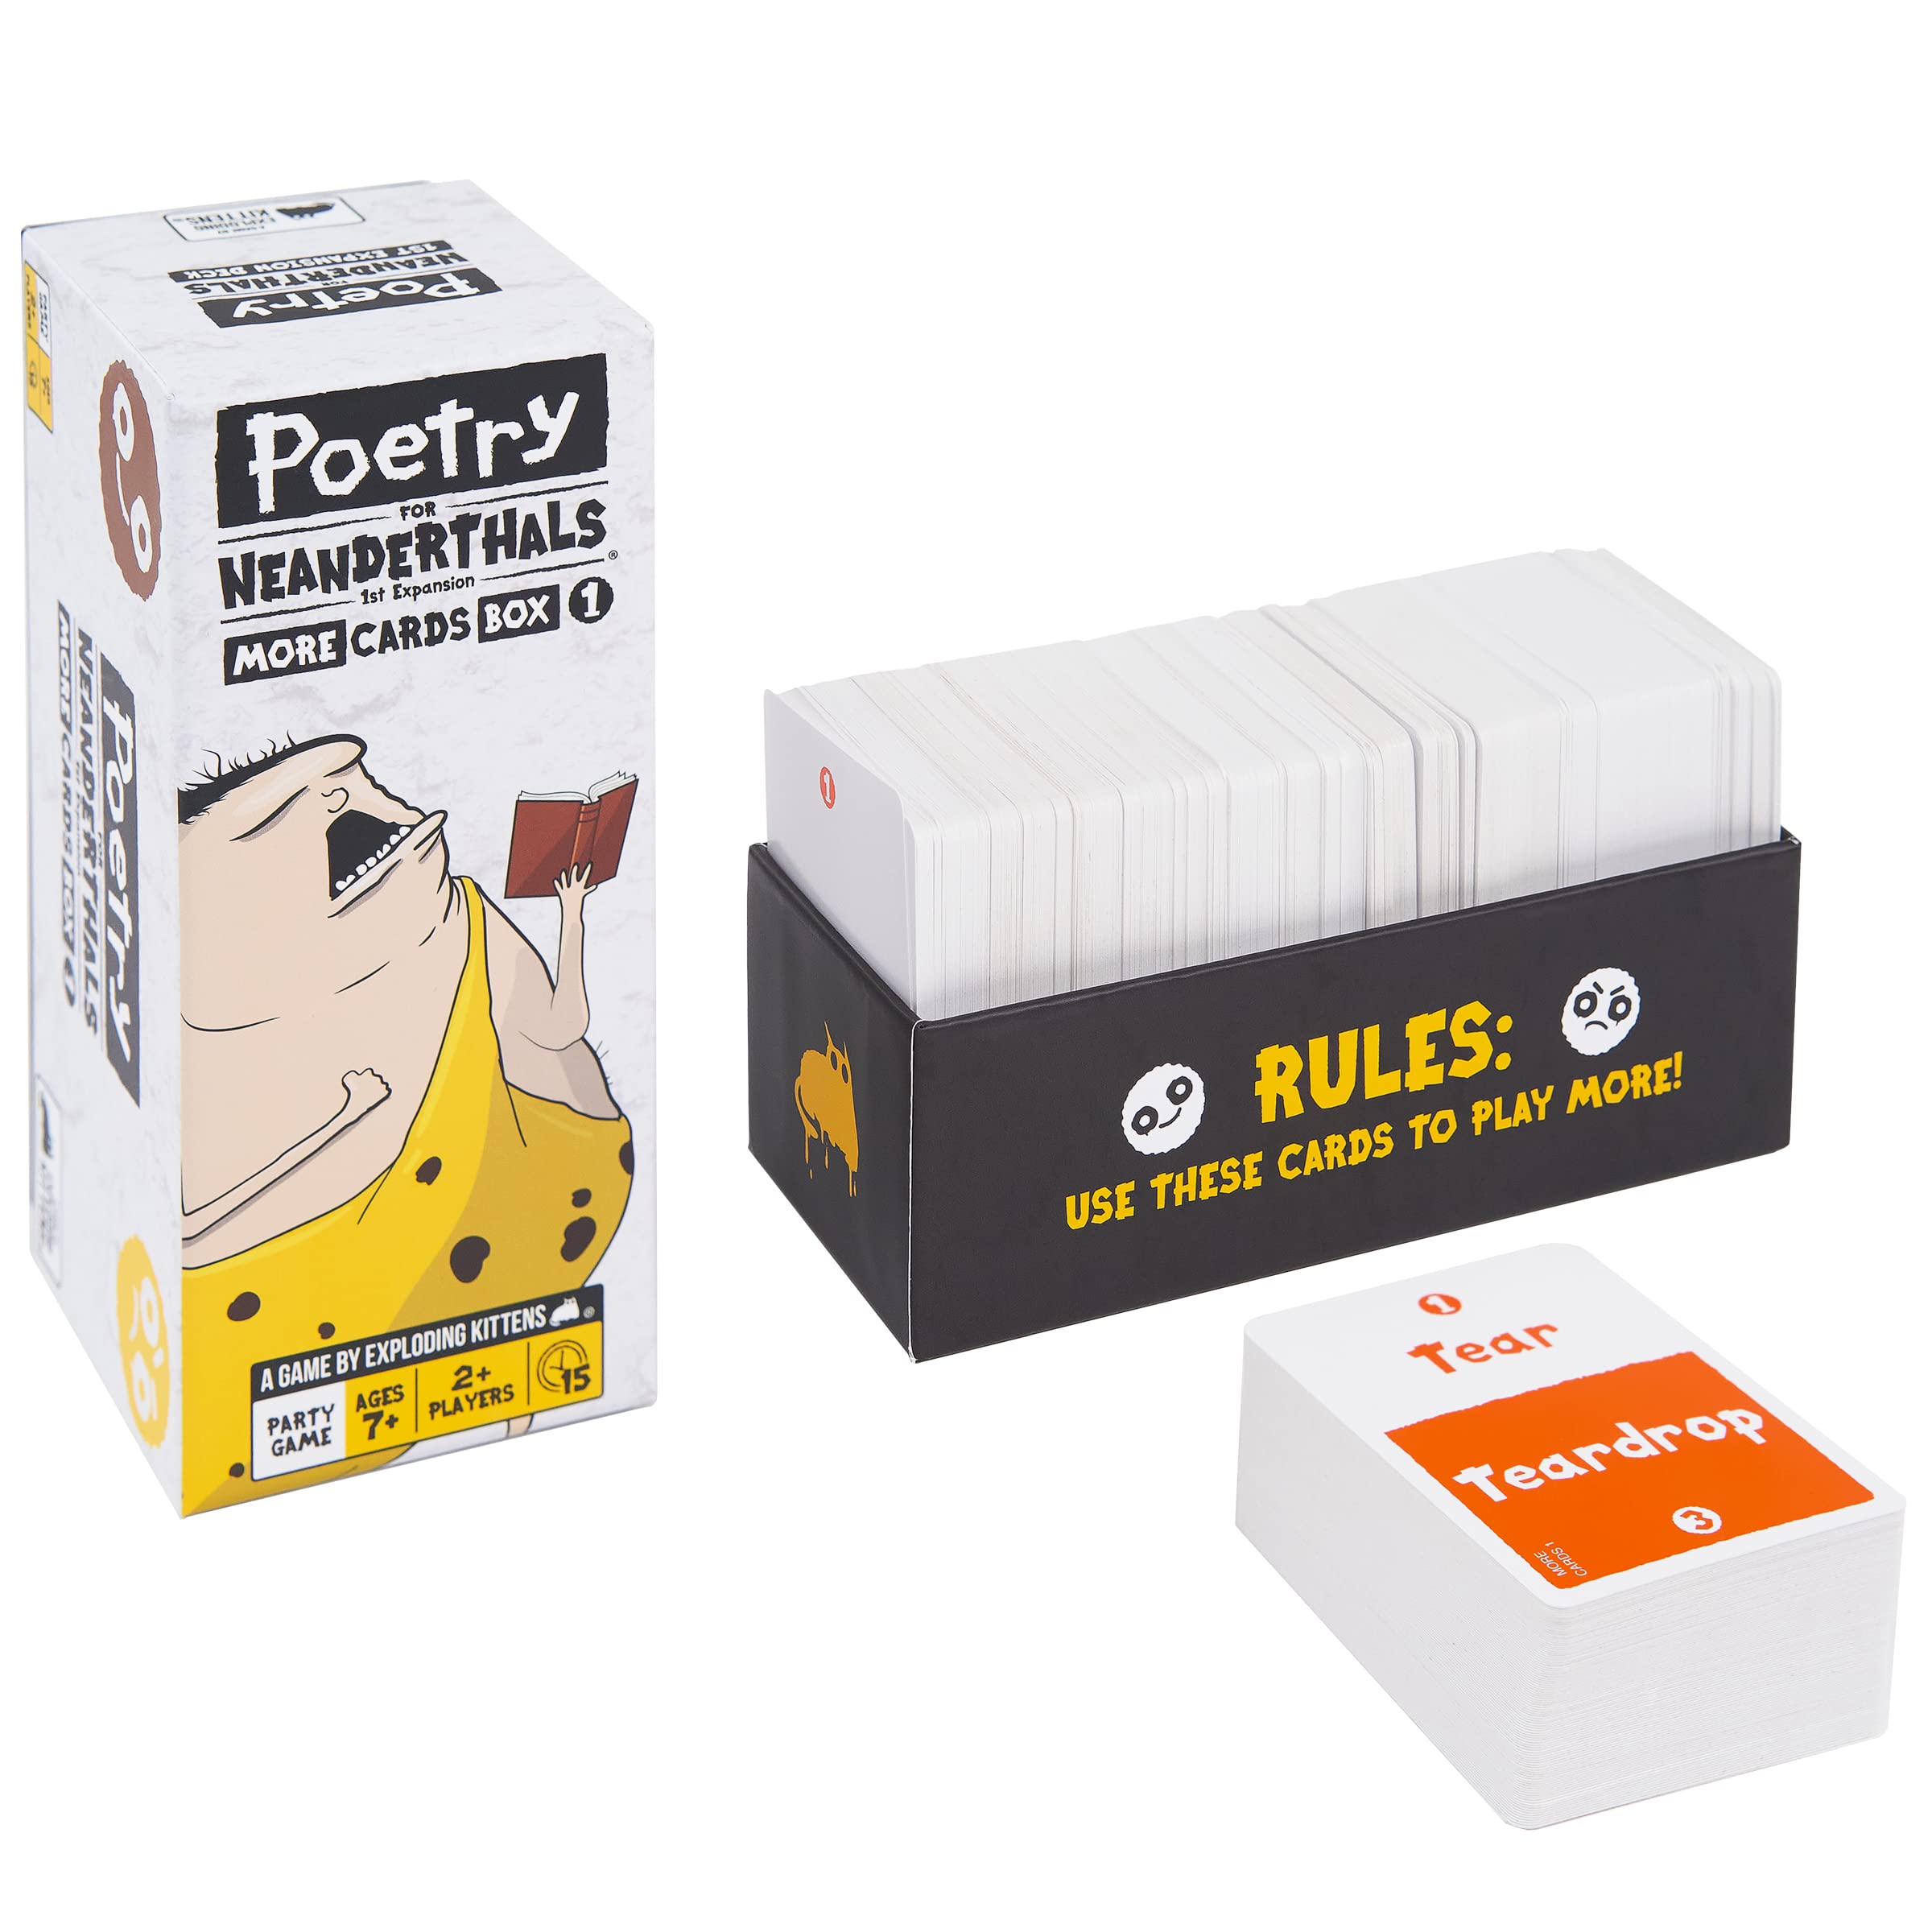 Poetry for Neanderthals Expansion Pack - 500 Double Sided Cards - More Cards Box 1 with 2000 New Words - Word Guessing Card Games for Family Game Night - from The Creators of Exploding Kittens